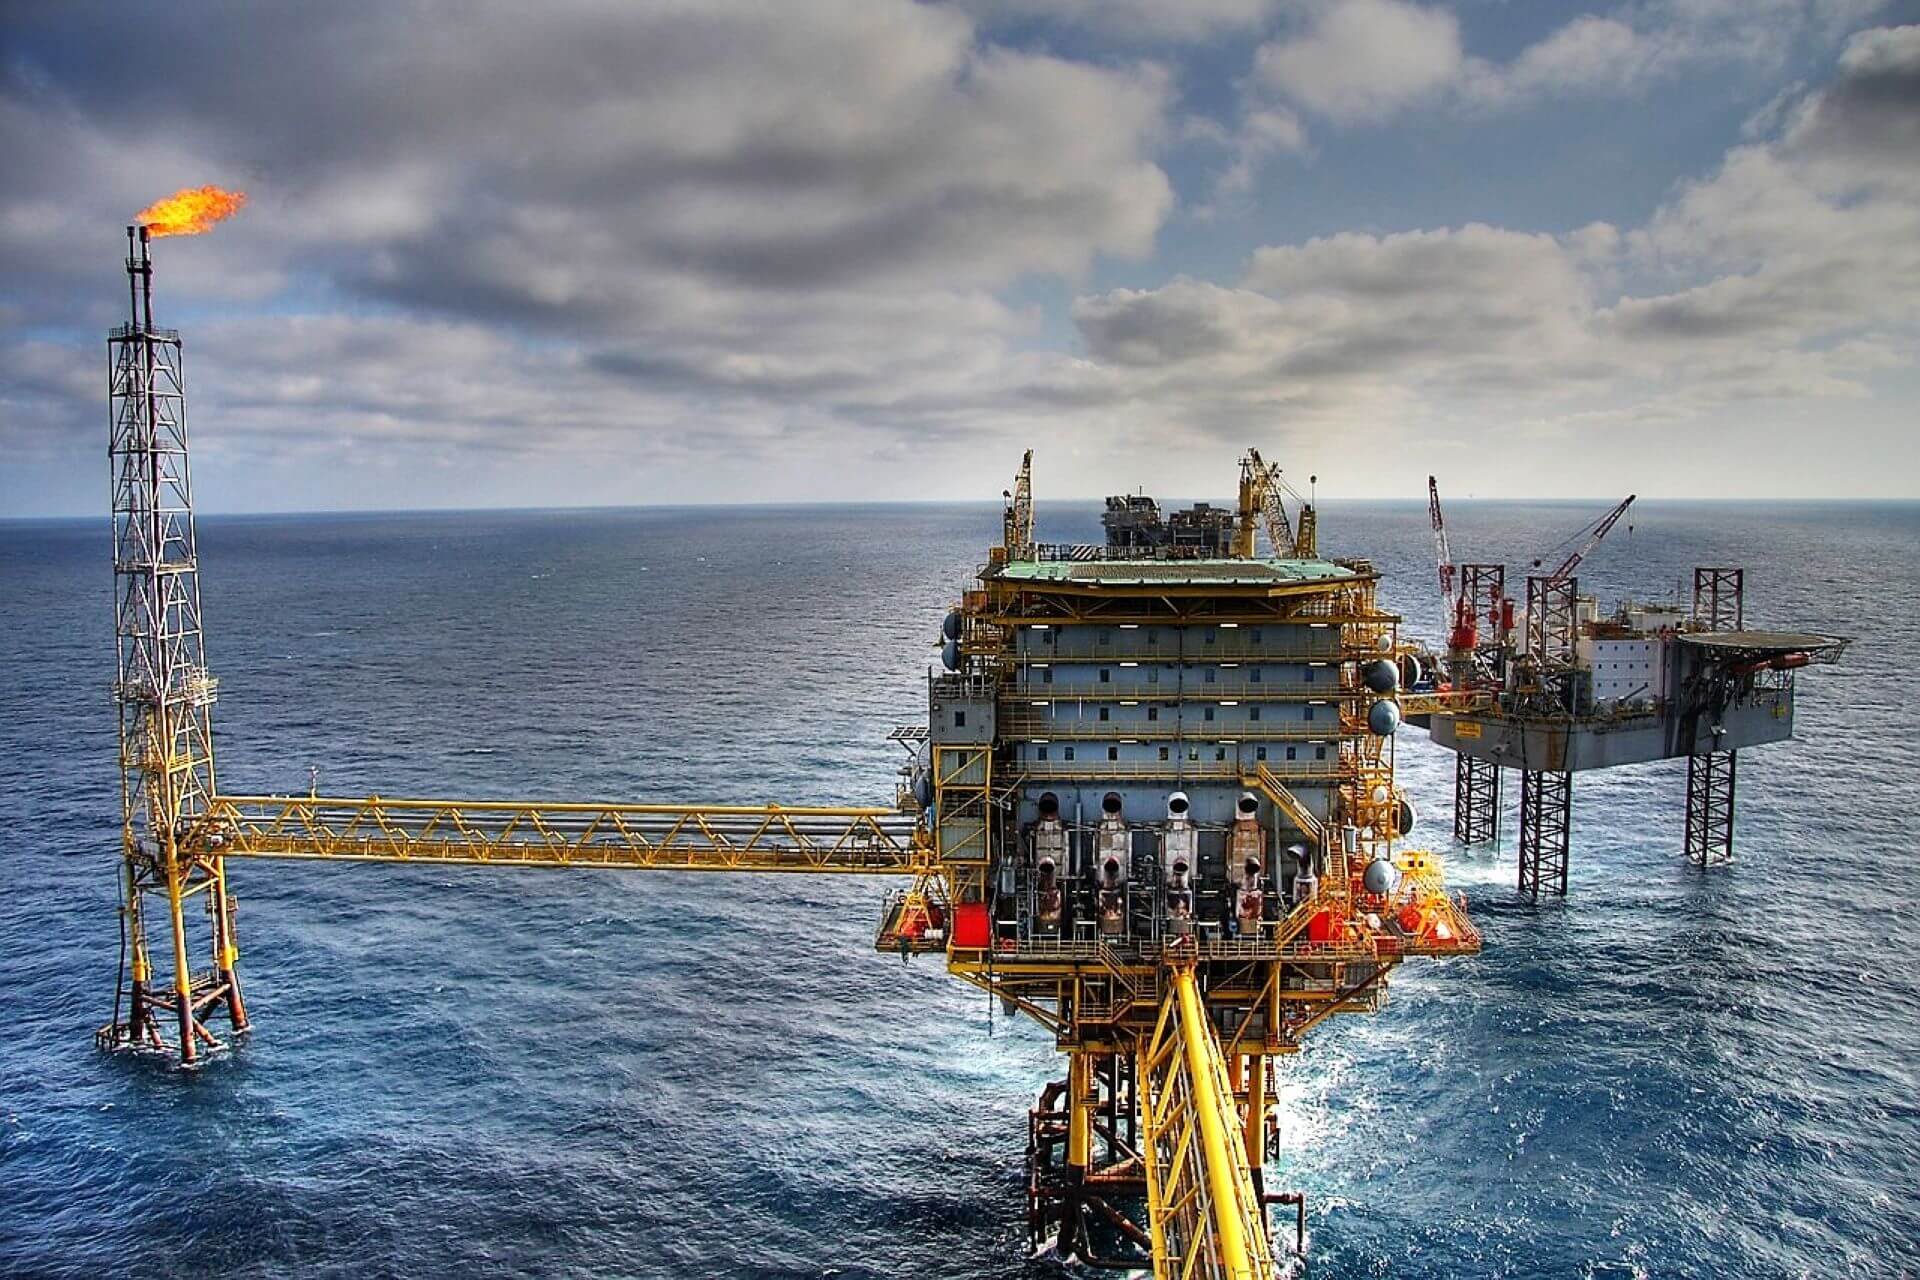 Oil and gas platform out at sea